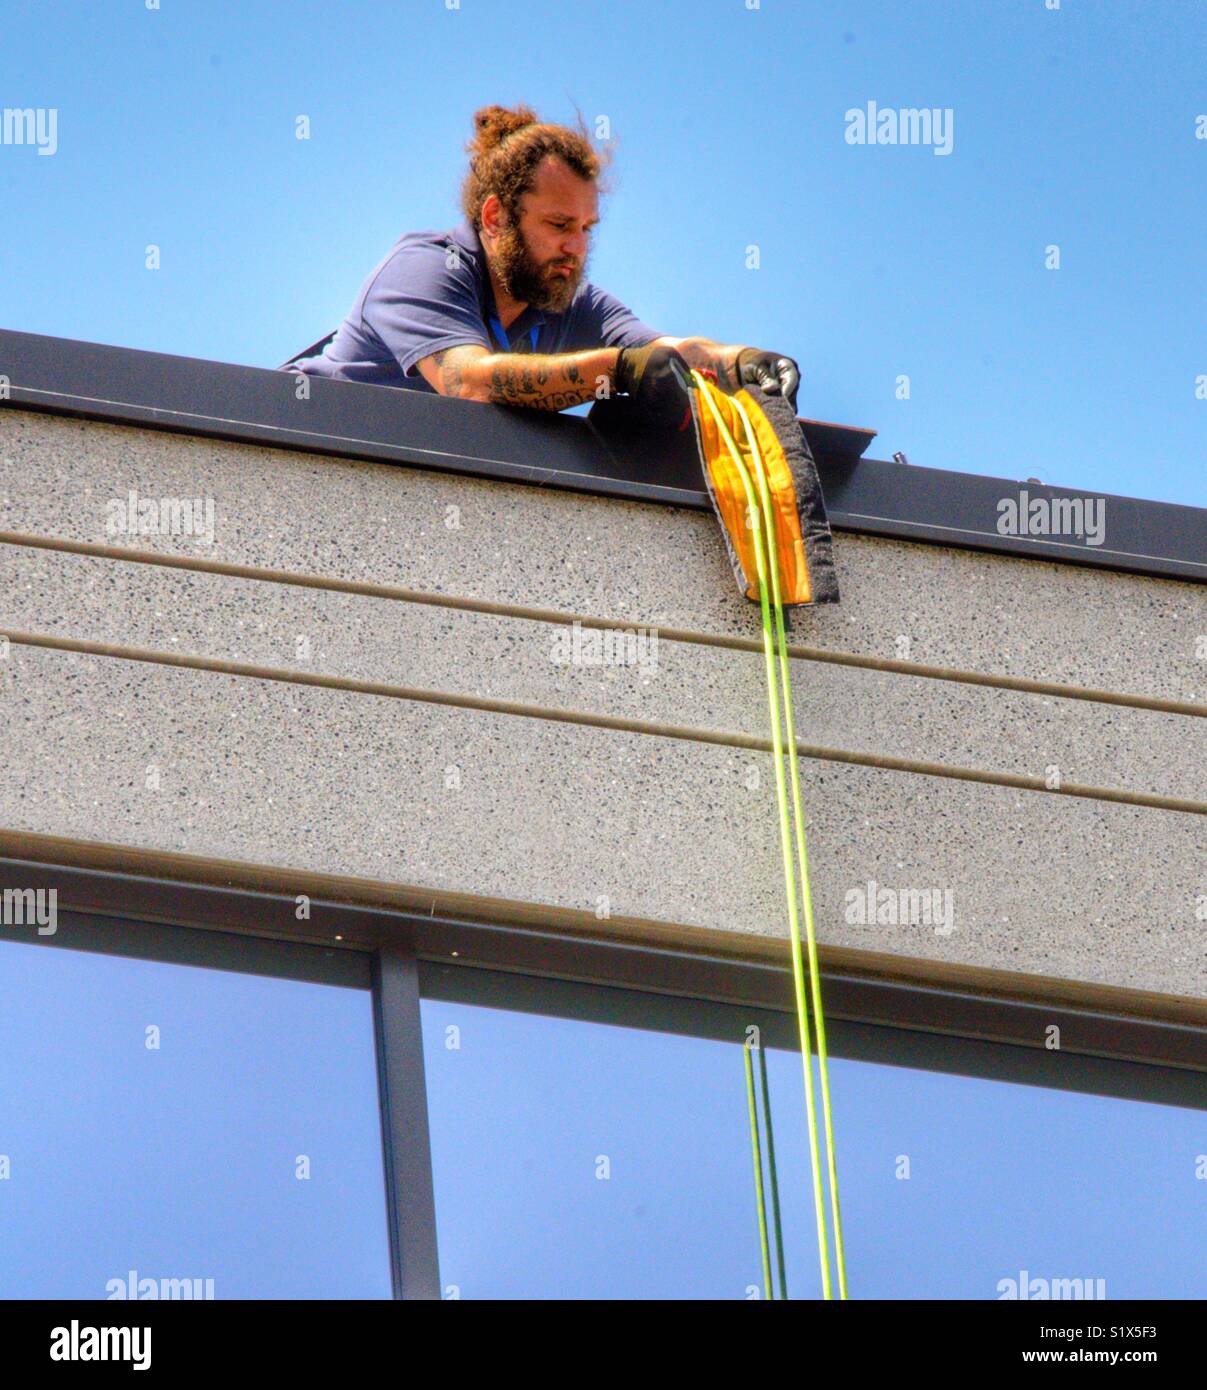 Man who is a window washer is setting up his rigging to prepare to rappel down the side in order to wash windows Stock Photo